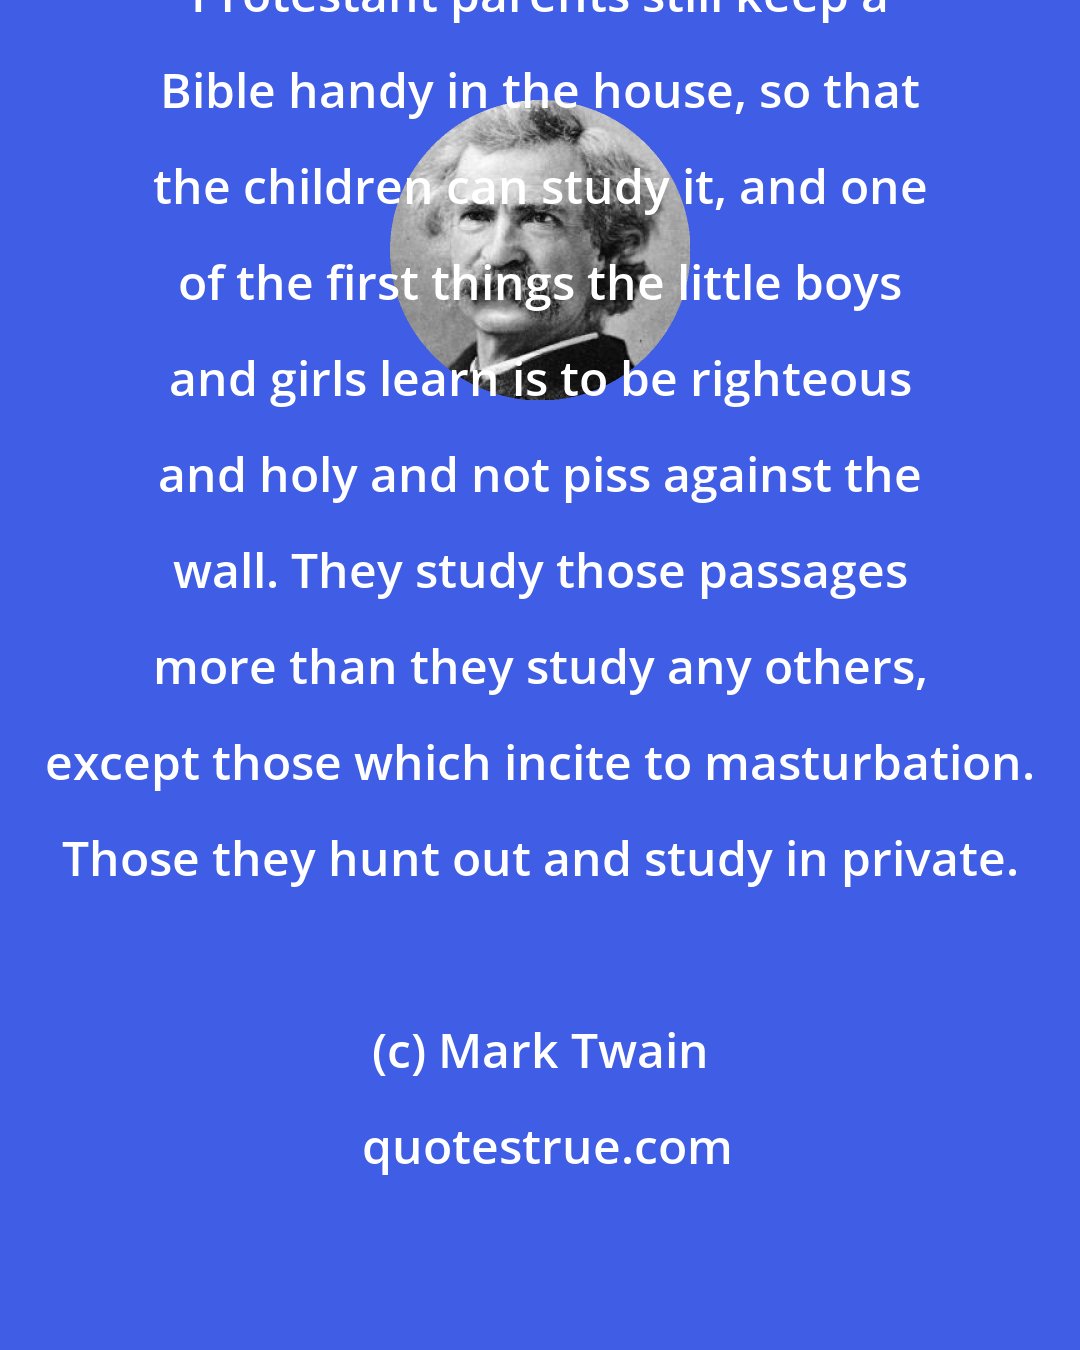 Mark Twain: Protestant parents still keep a Bible handy in the house, so that the children can study it, and one of the first things the little boys and girls learn is to be righteous and holy and not piss against the wall. They study those passages more than they study any others, except those which incite to masturbation. Those they hunt out and study in private.